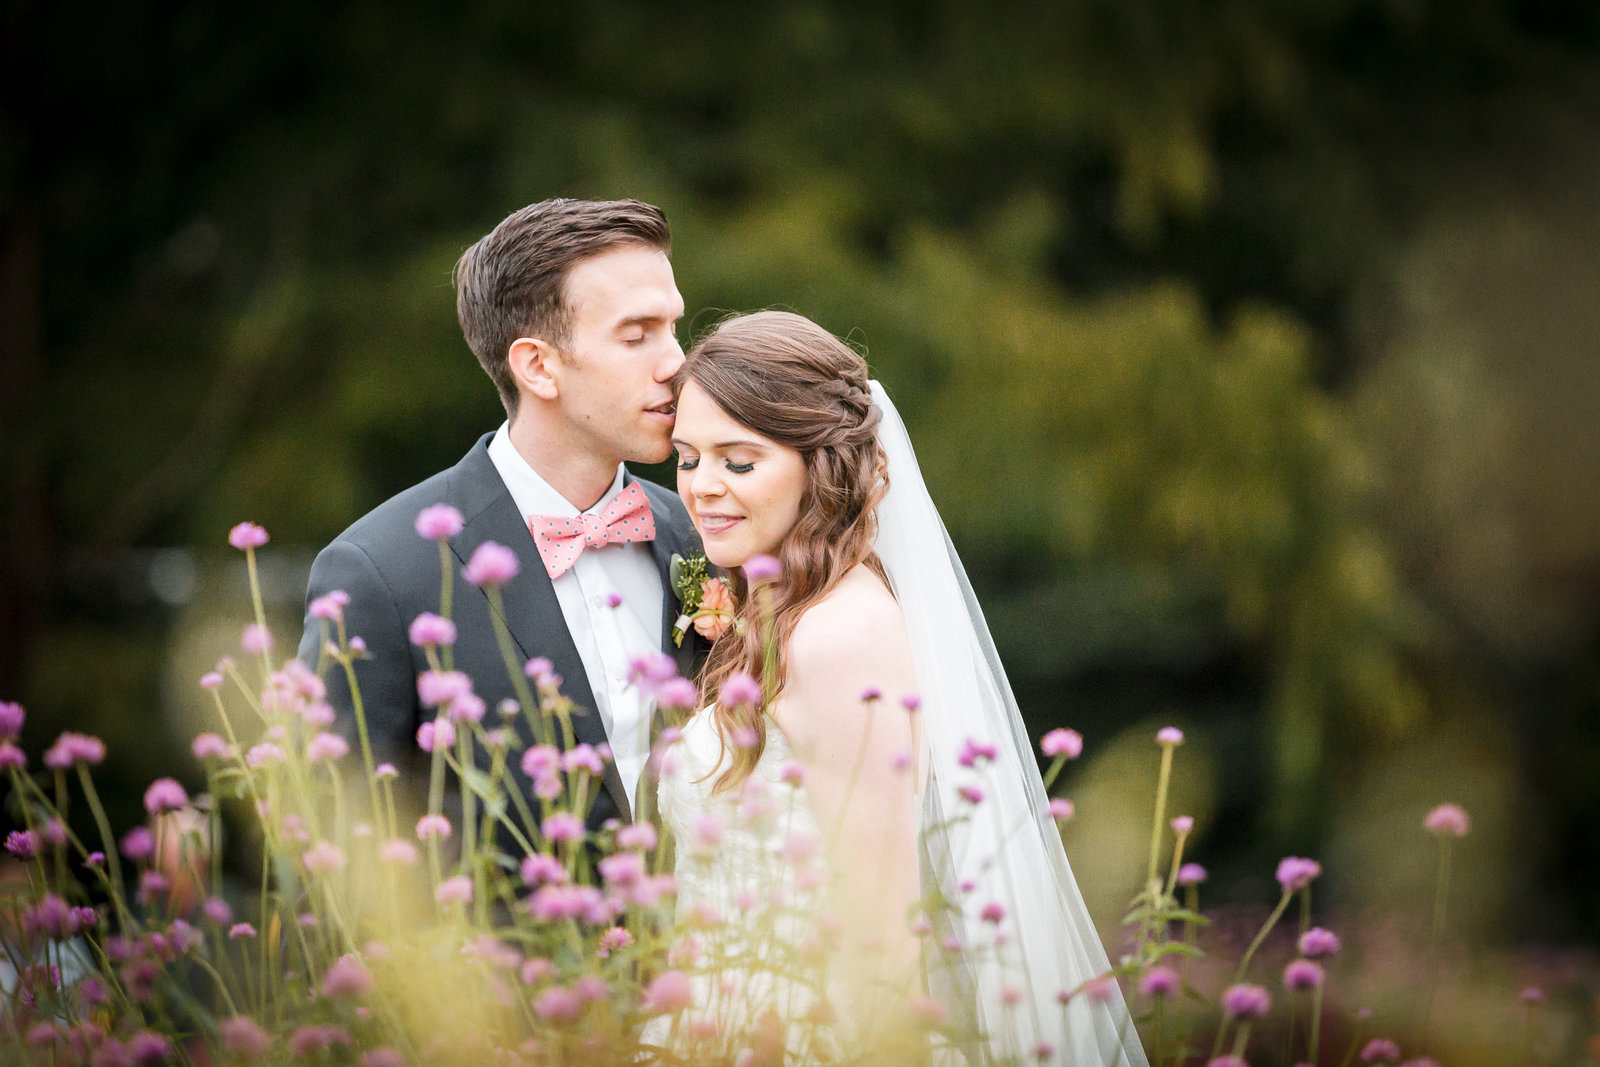 Bride and groom at Elizabeth Park Wedding in Connecticut by Jamerlyn Brown Photography